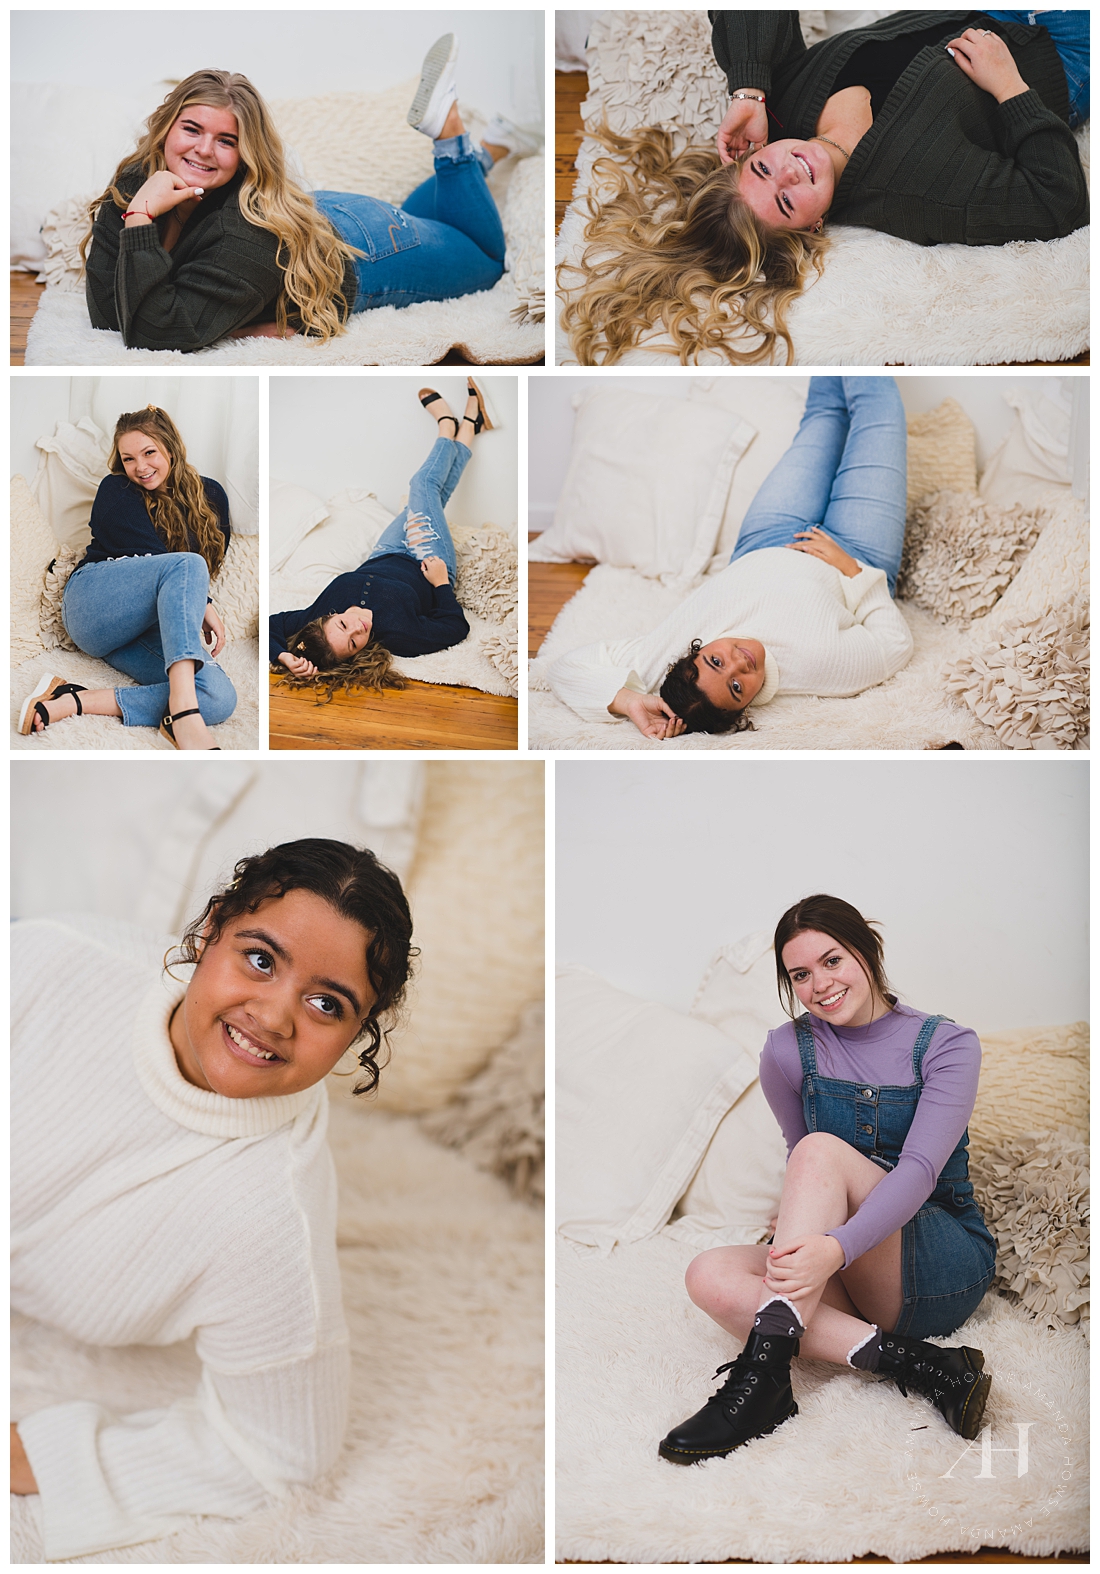 AHP Model Team Group Portrait Session | January Photoshoot in Tacoma, Indoor Senior Portraits at Studio 253, How to Style a Fun Portrait Session for Seniors | Photographed by the Best Tacoma Senior Photographer Amanda Howse 